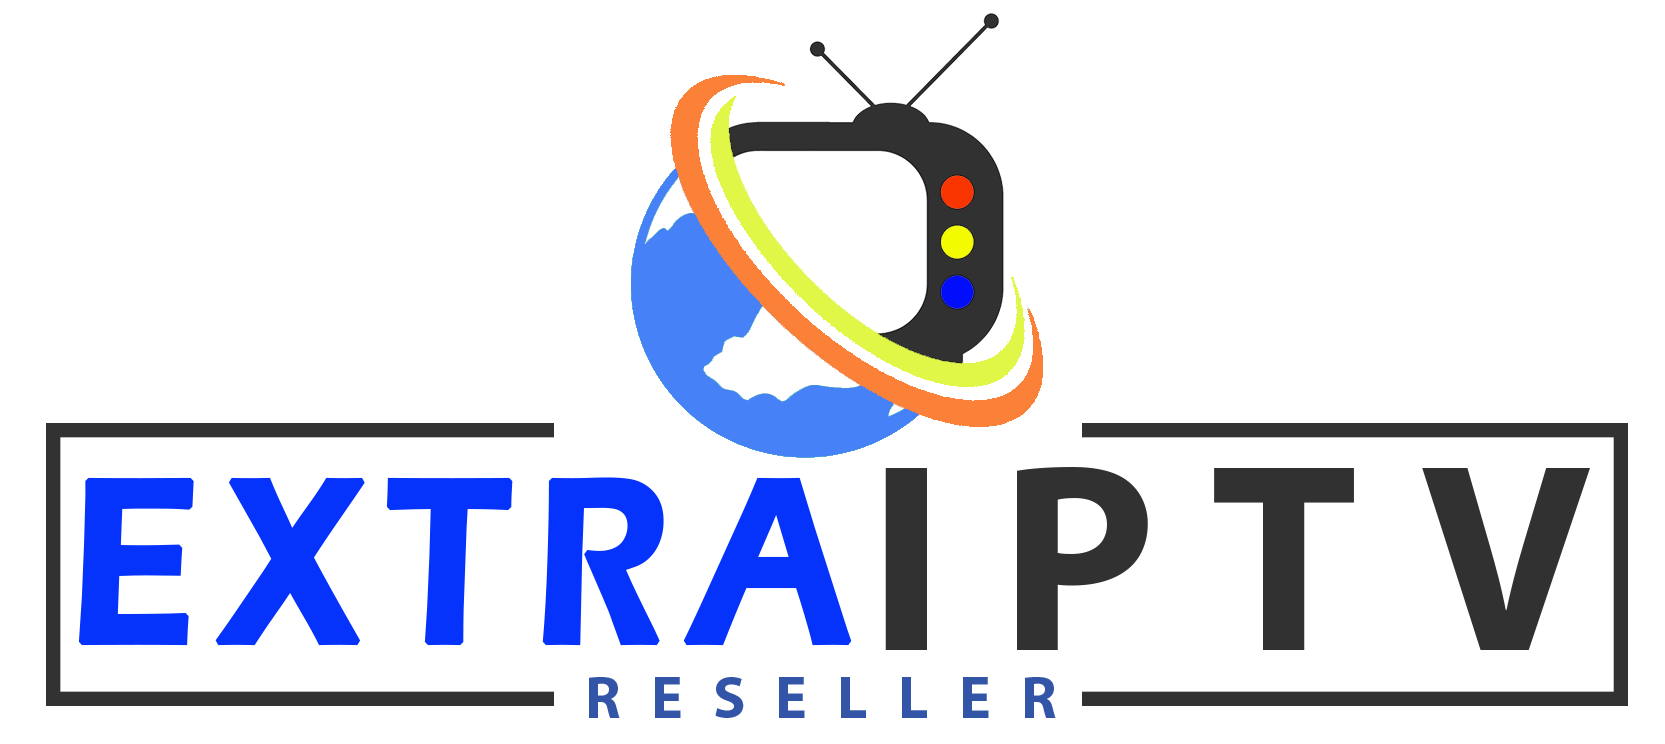 EXTRA IPTV Reseller is best IPTV Reselling Service Provider, Get an IPTV Reseller panel cheaper than wholesale market in 2022.